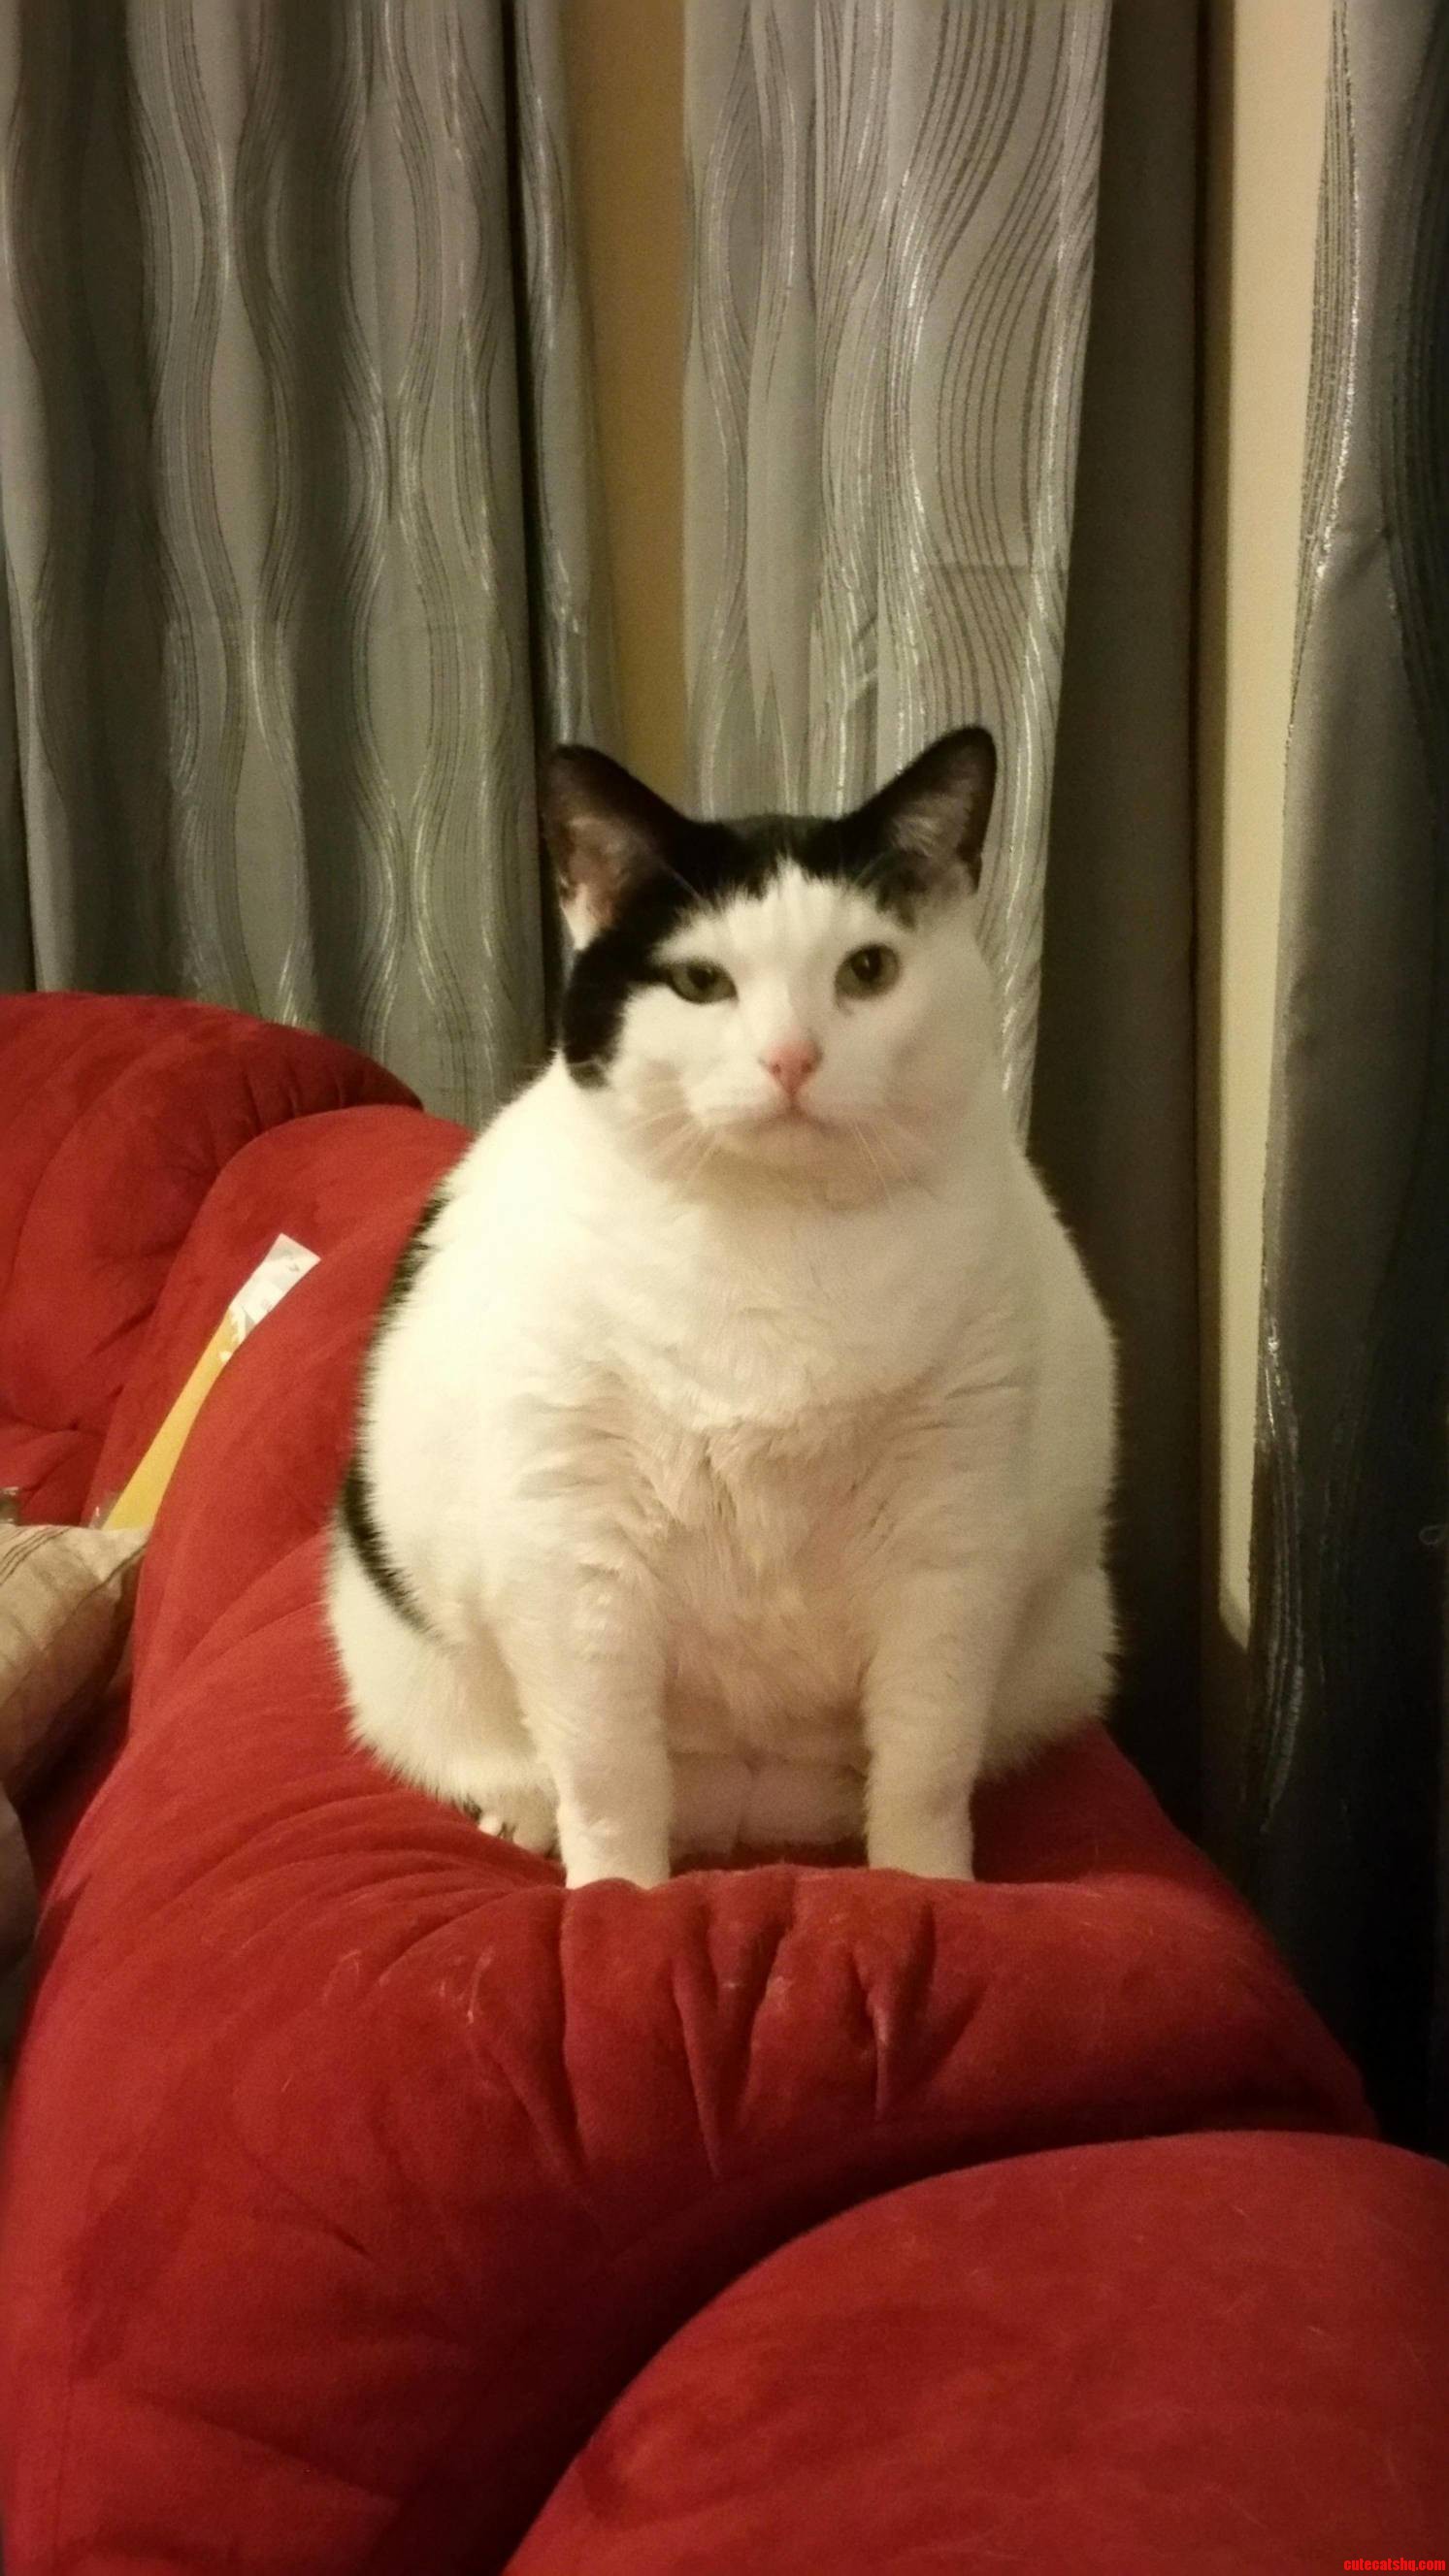 My wifes cat is soooo fat but awesome